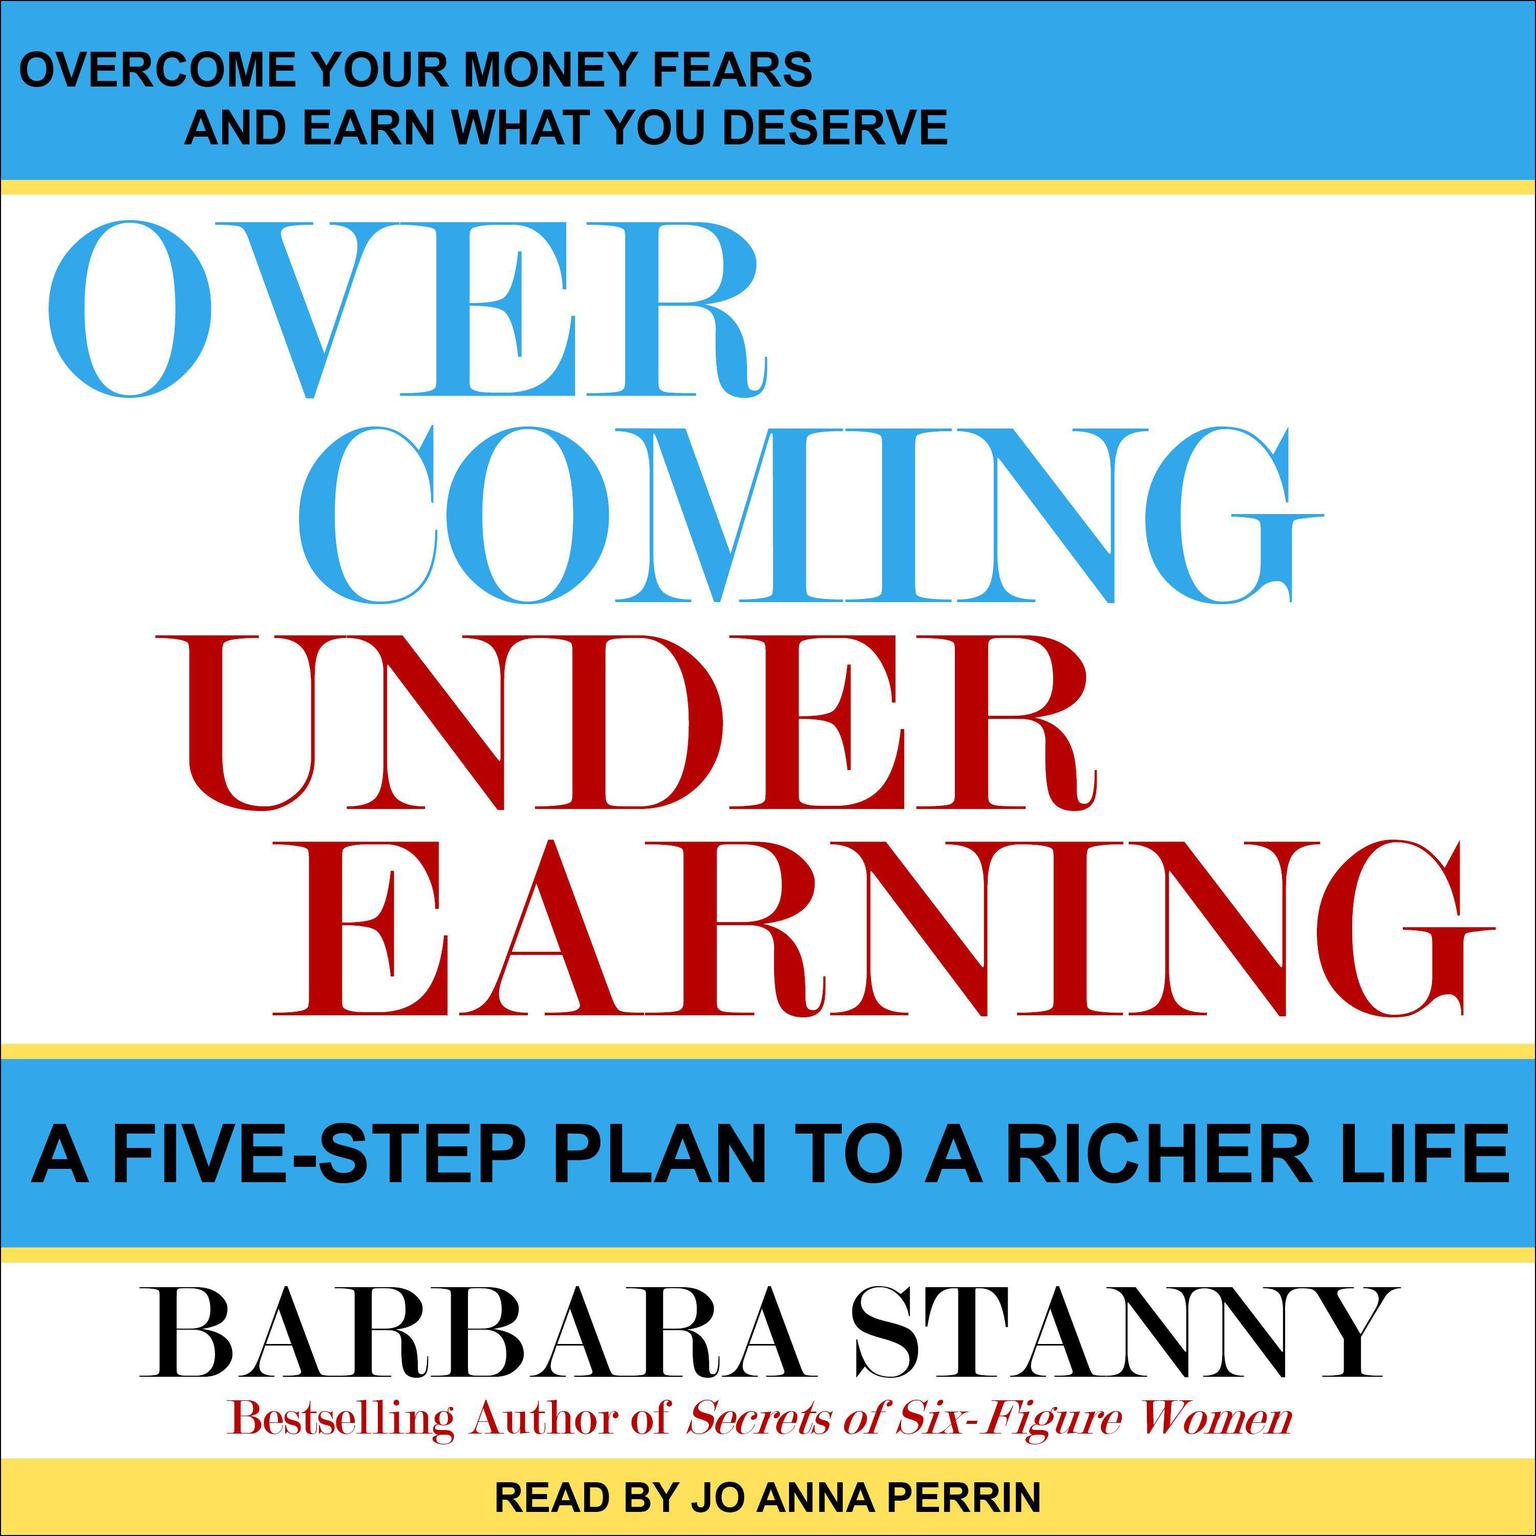 Overcoming Underearning: A Five-Step Plan to a Richer Life Audiobook, by Barbara Stanny